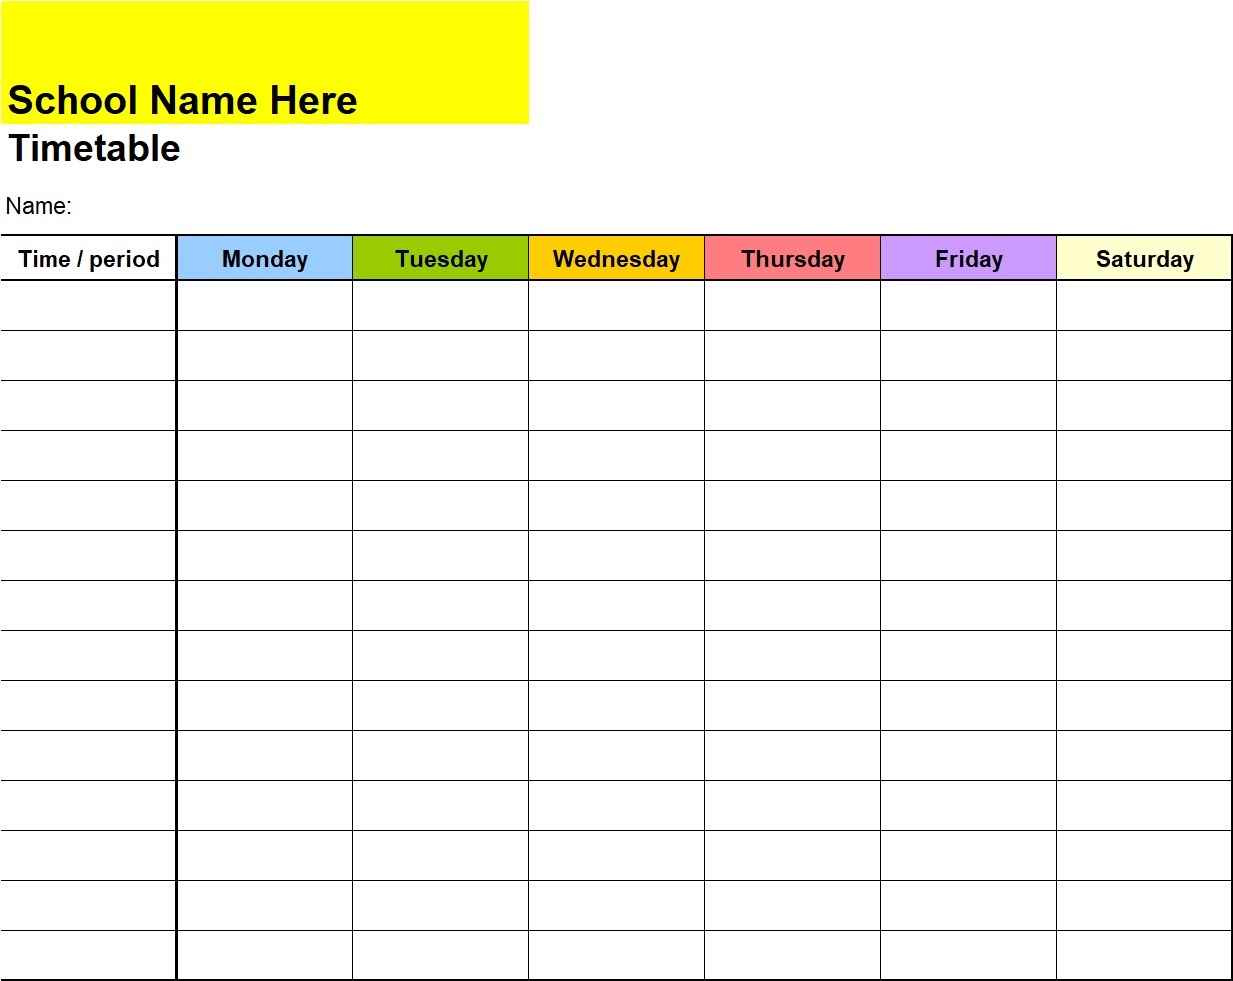 timetable-template-excel-word-template